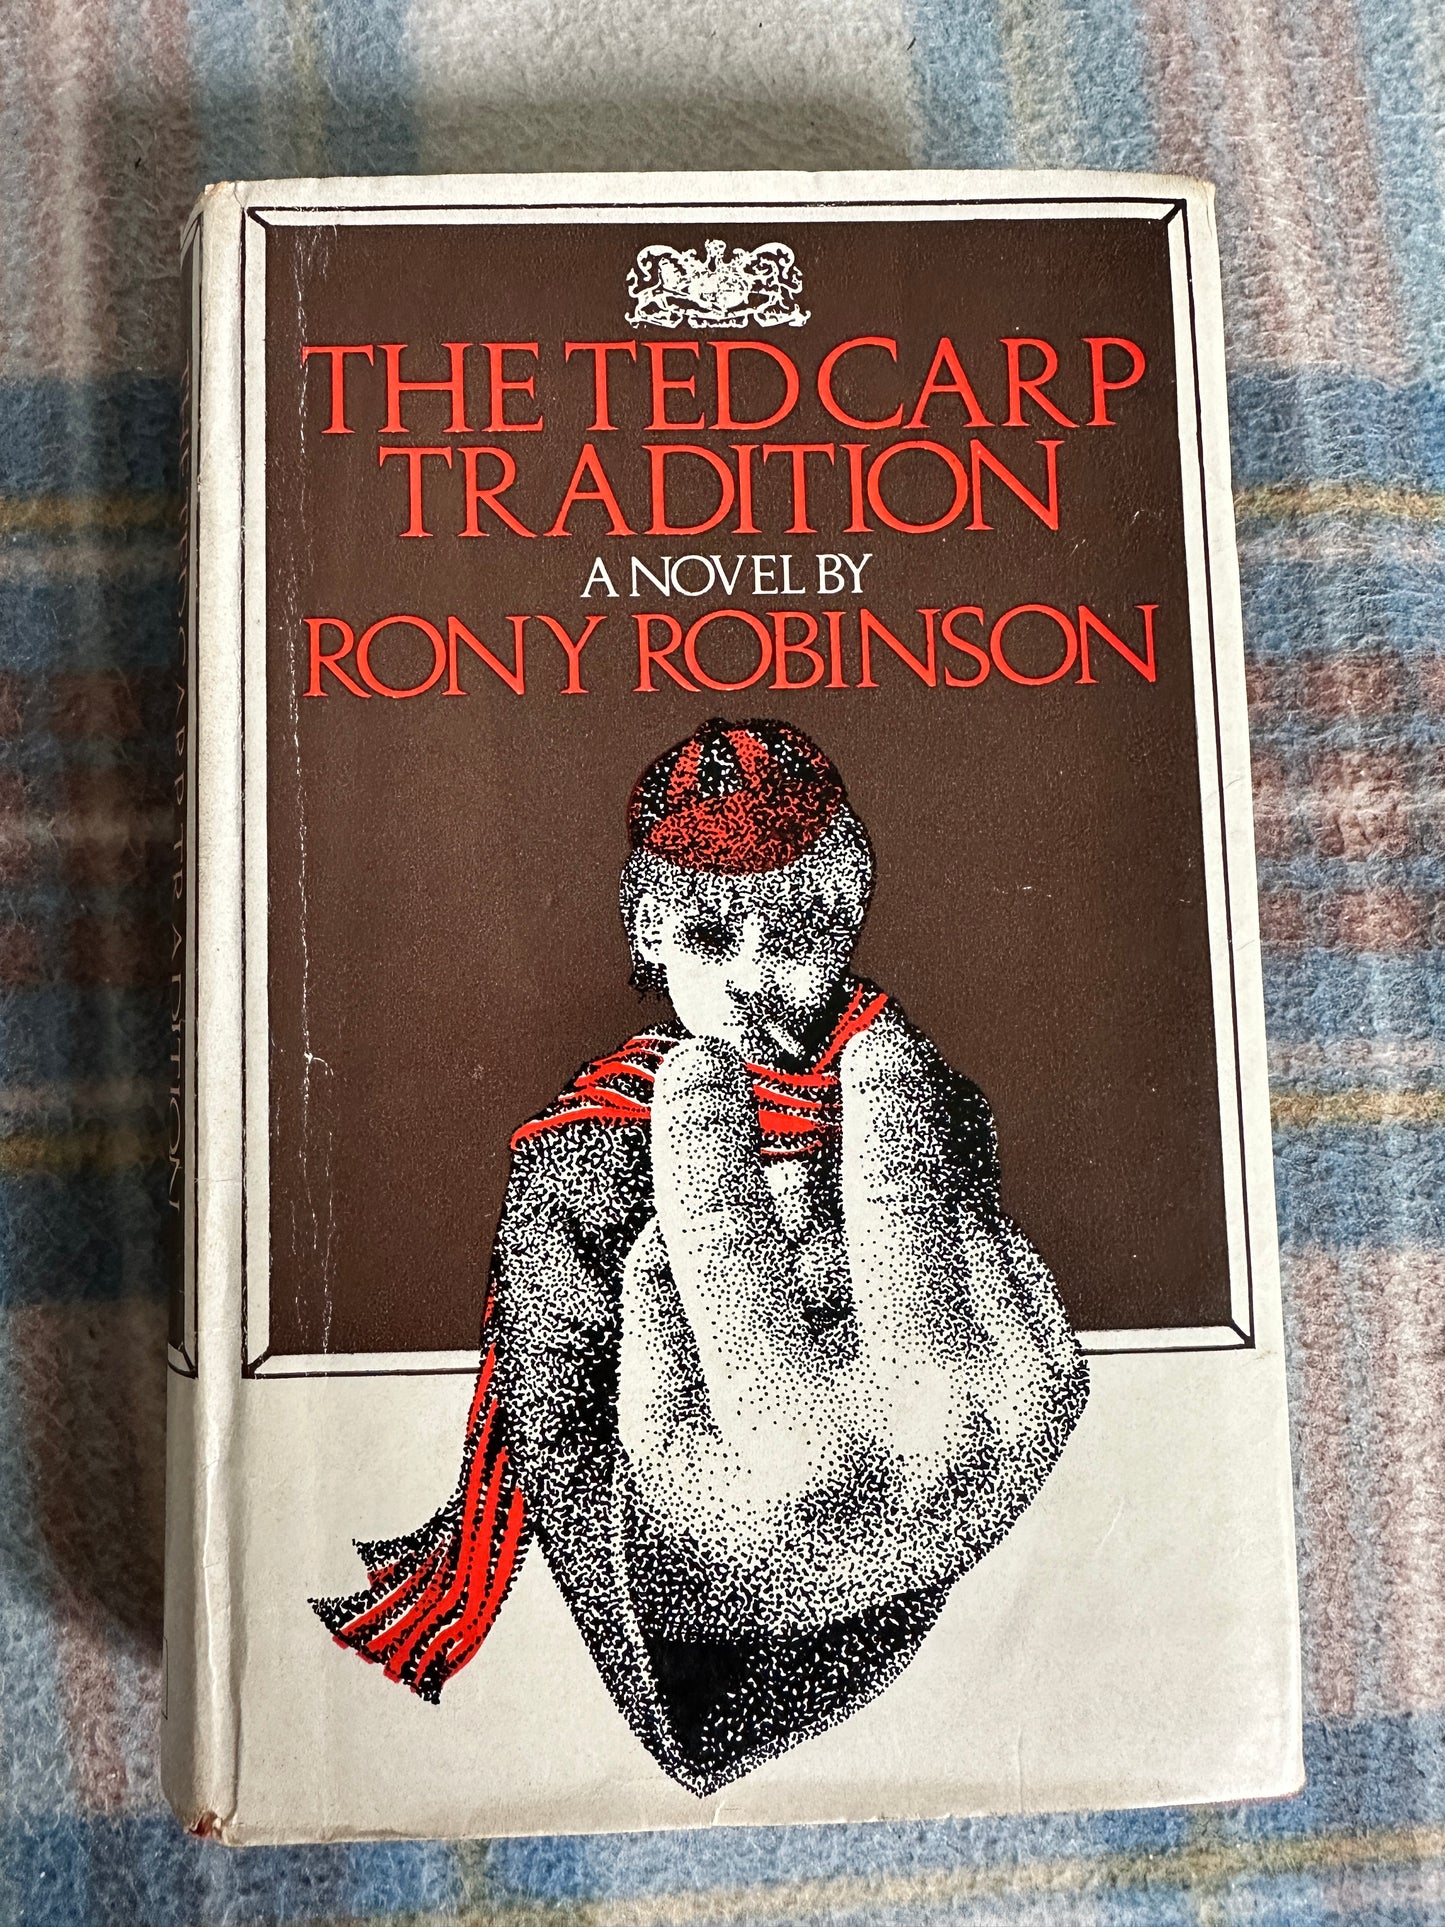 1971*1st* The Ted Carp Tradition - Rony Robinson(Hodder & Stoughton)